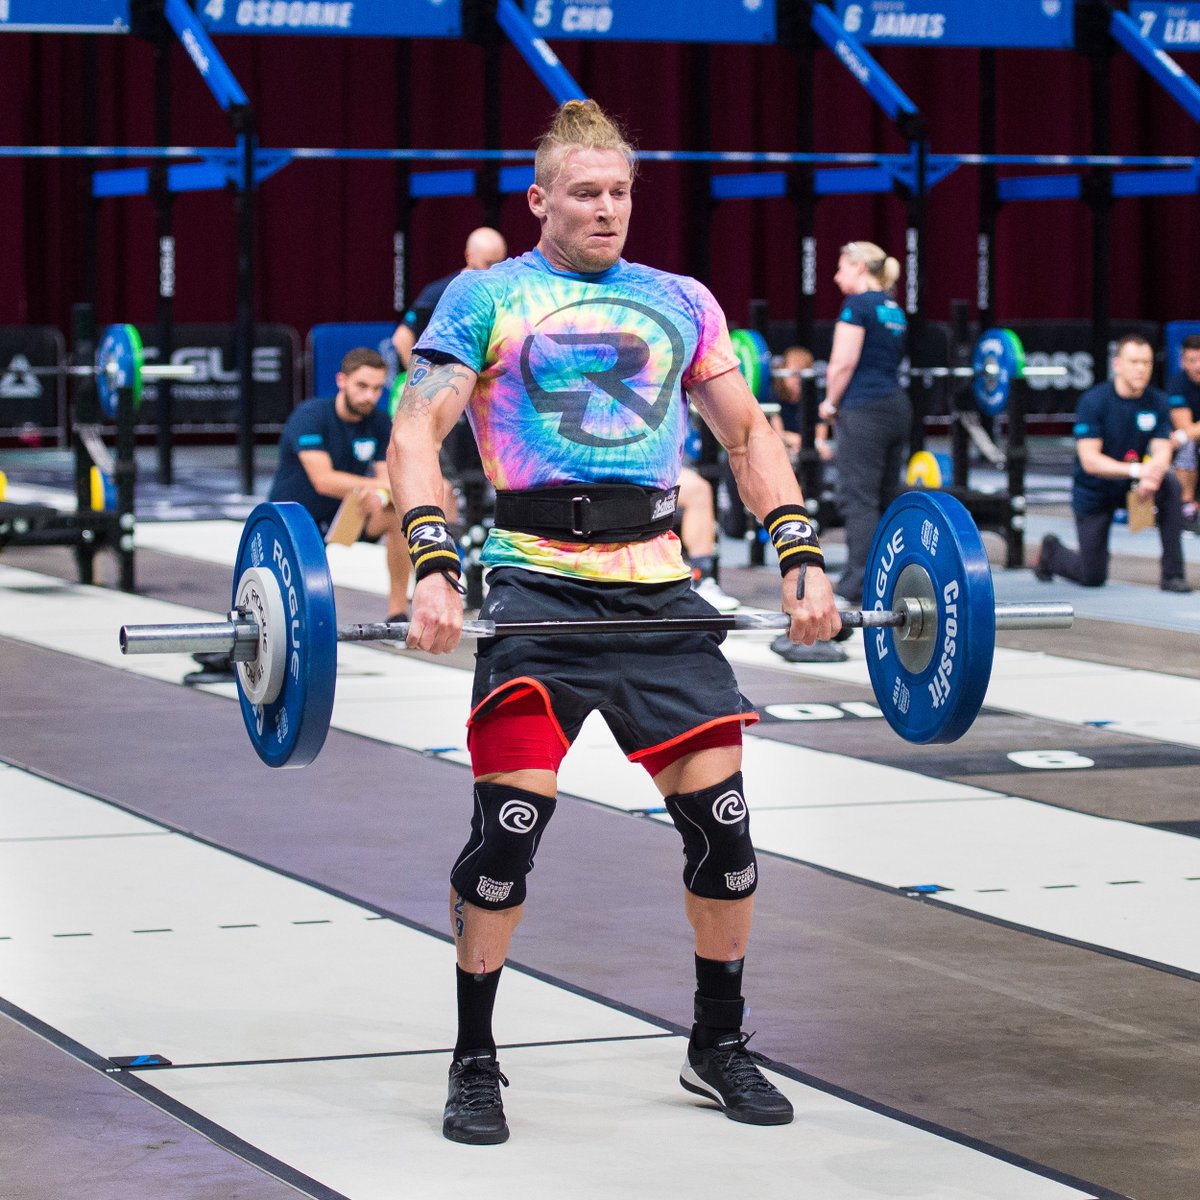 The 2017 #PacificRegional champ is off to a great start, defending that title.
James Newbury had no trouble with Linda, earning the third fastest time in the world at 12:25.88. He heads into Day 2 in first place. #CrossFit